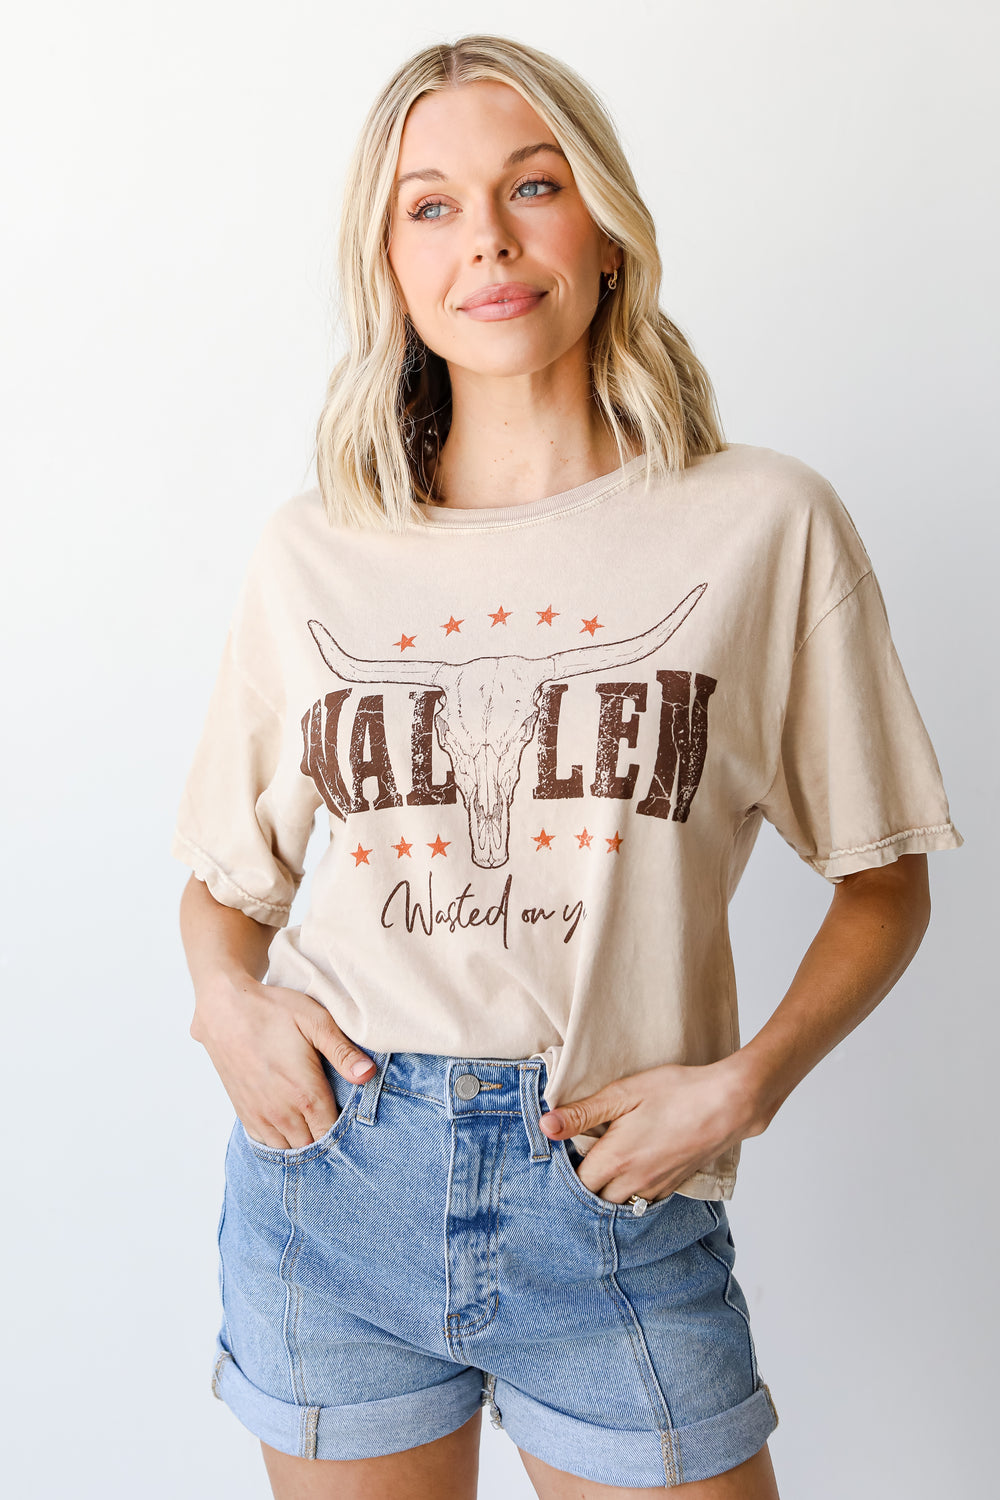 stone Wallen Wasted On You Cropped Graphic Tee